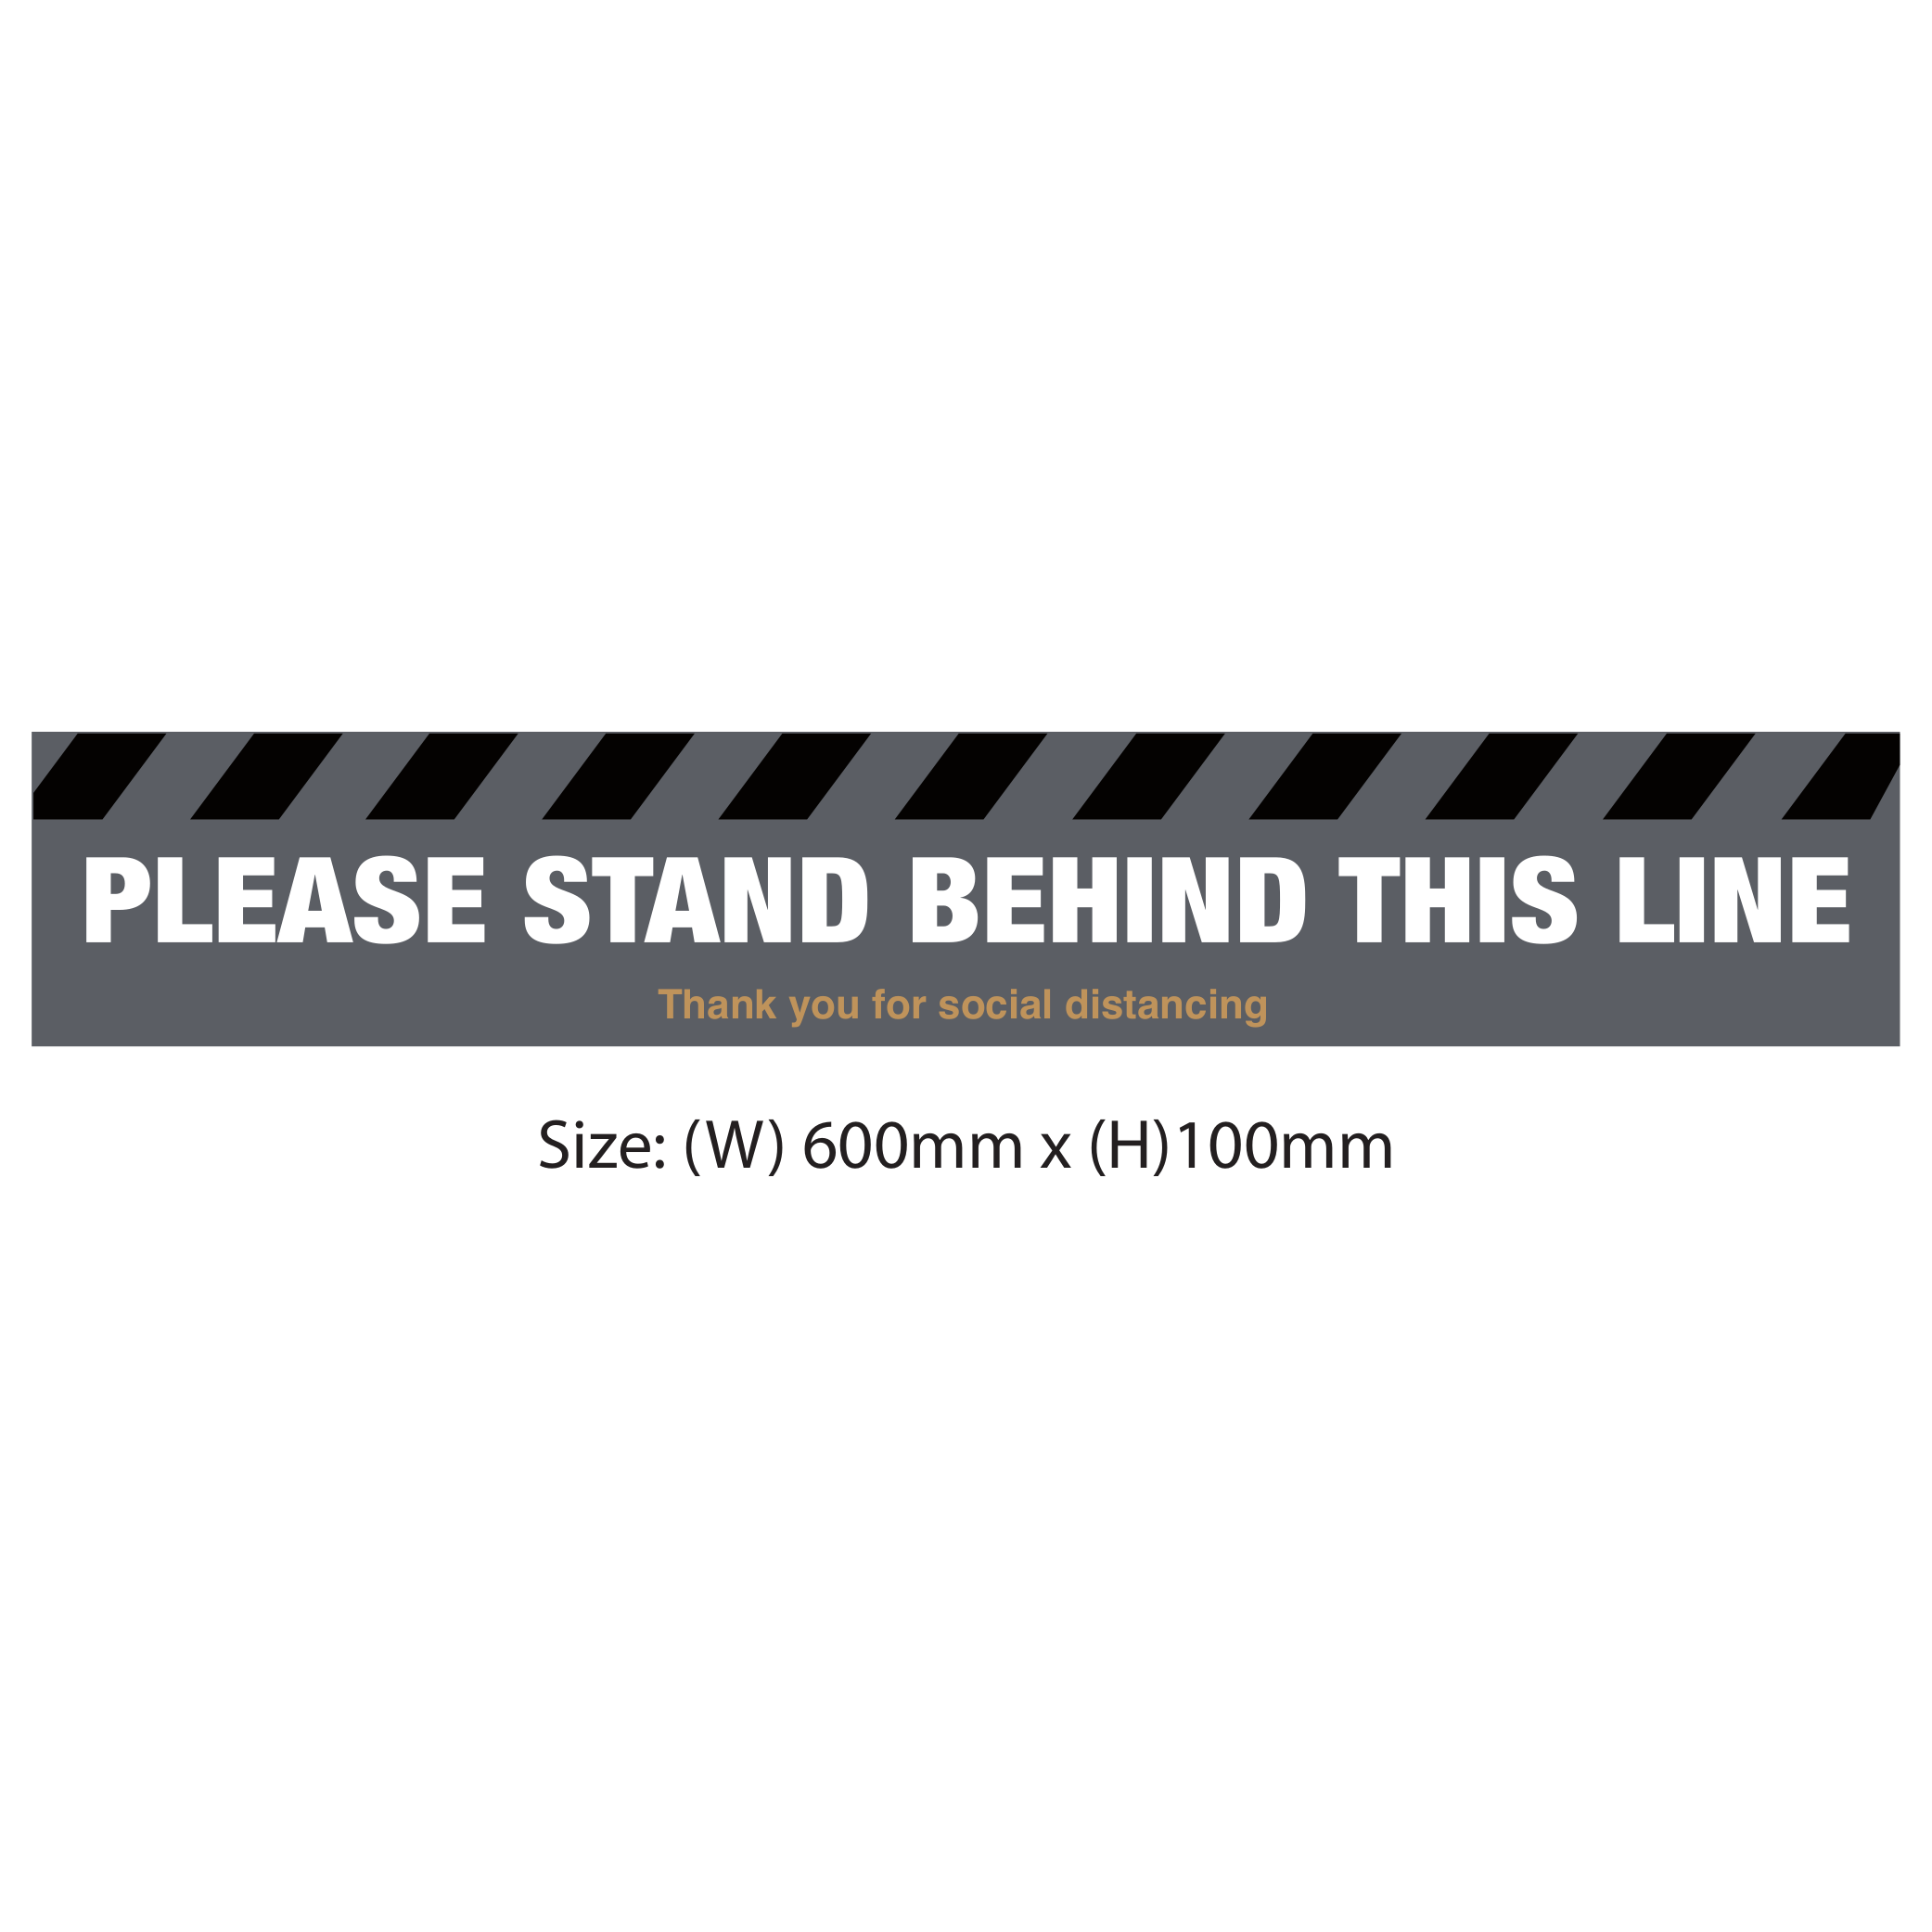 Please stand behind this line floor graphic